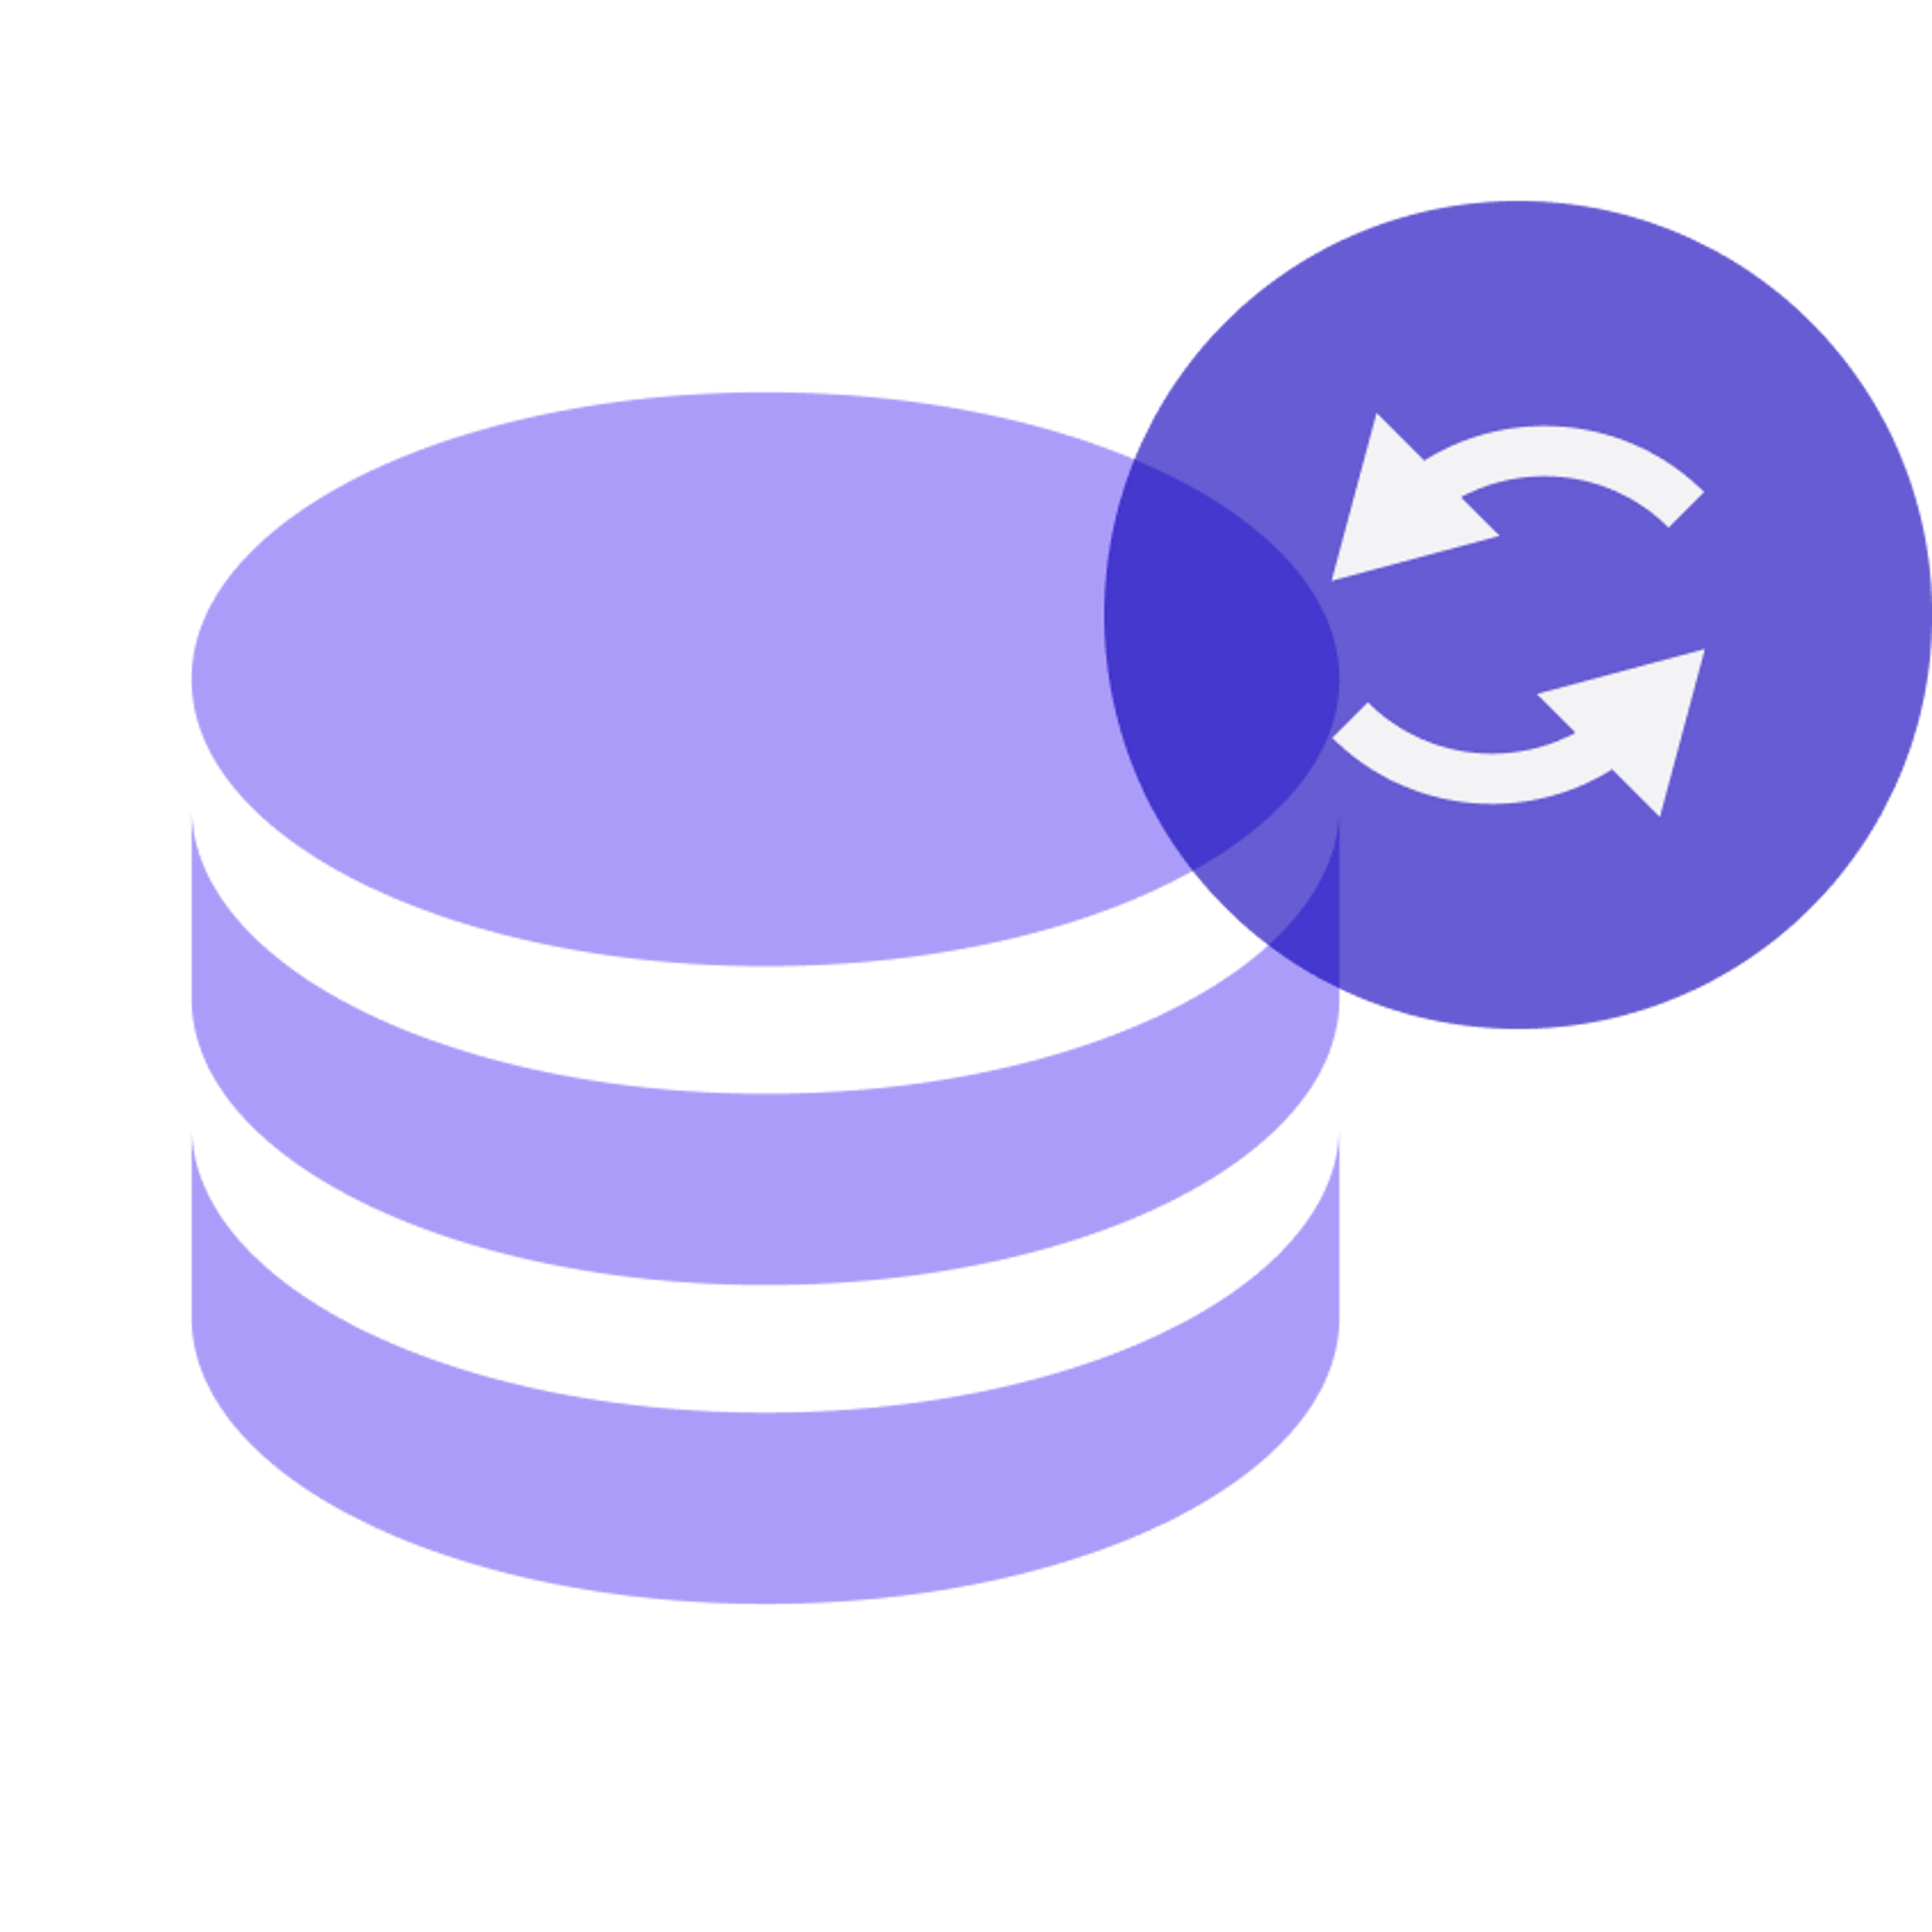 A purple icon of a stack of objects next to a recycle symbol on a transparent background